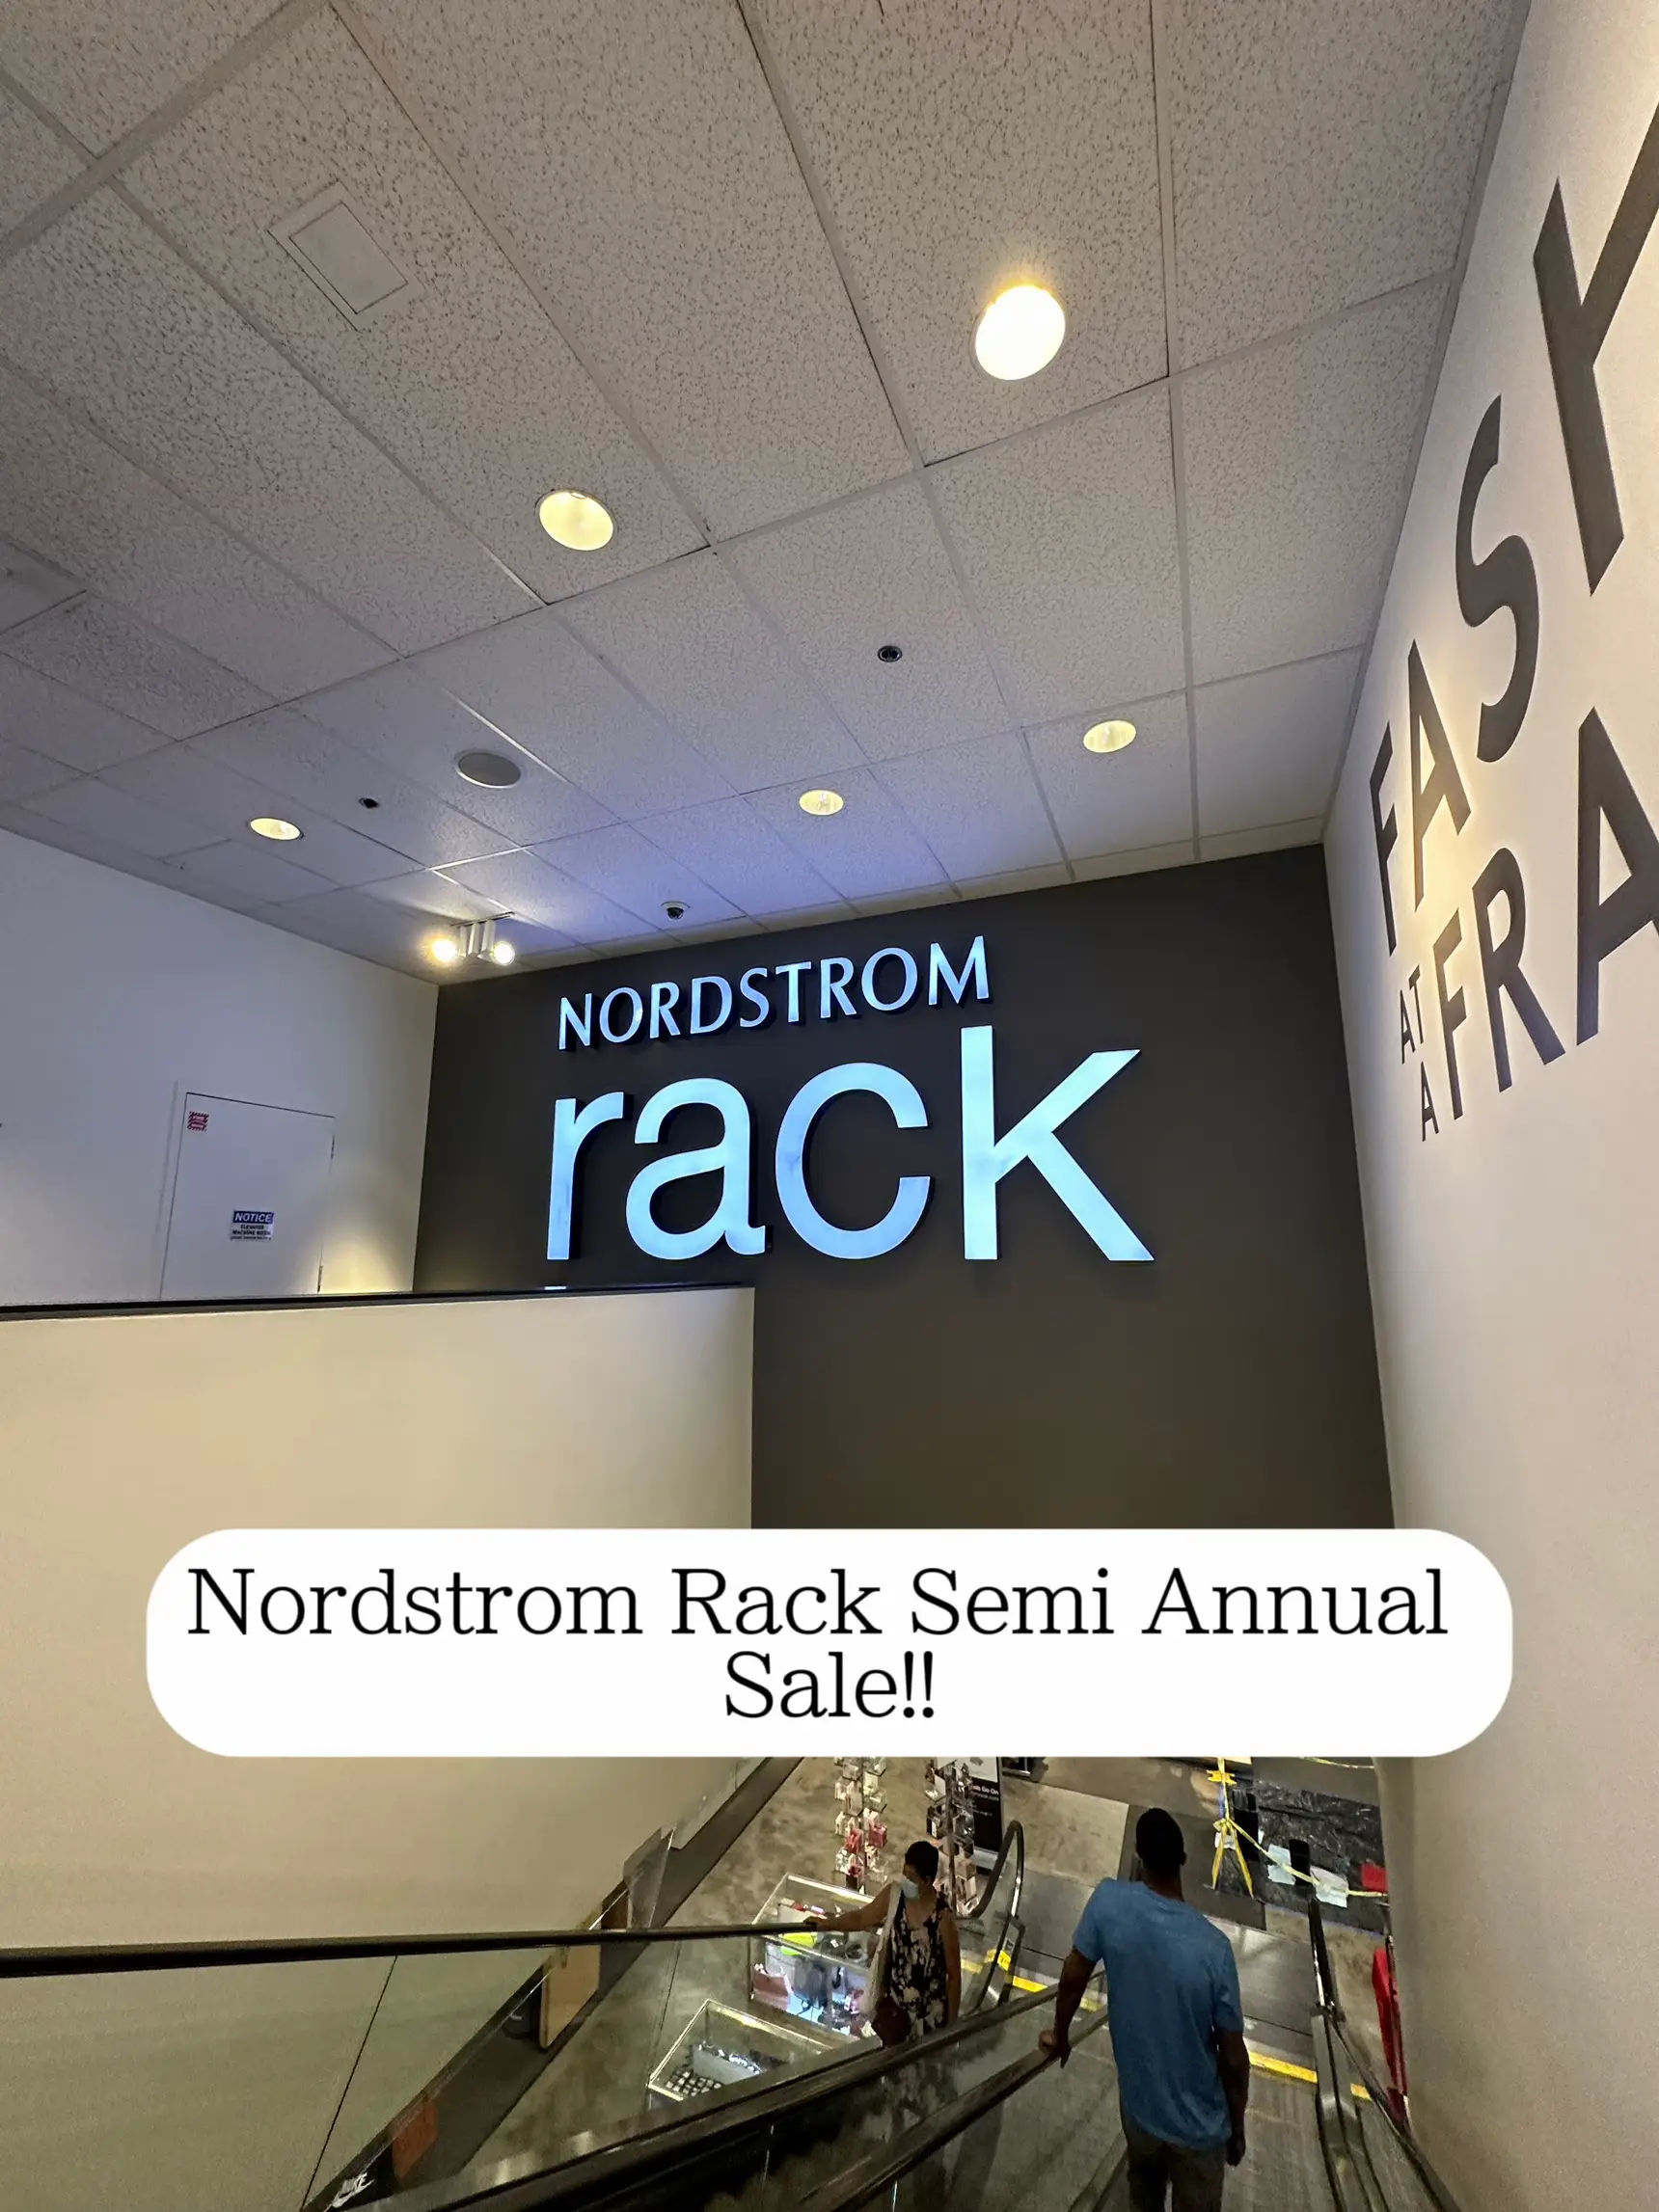 Why Is Nordstrom Rack so Cheap? Overstock, Past Seasons